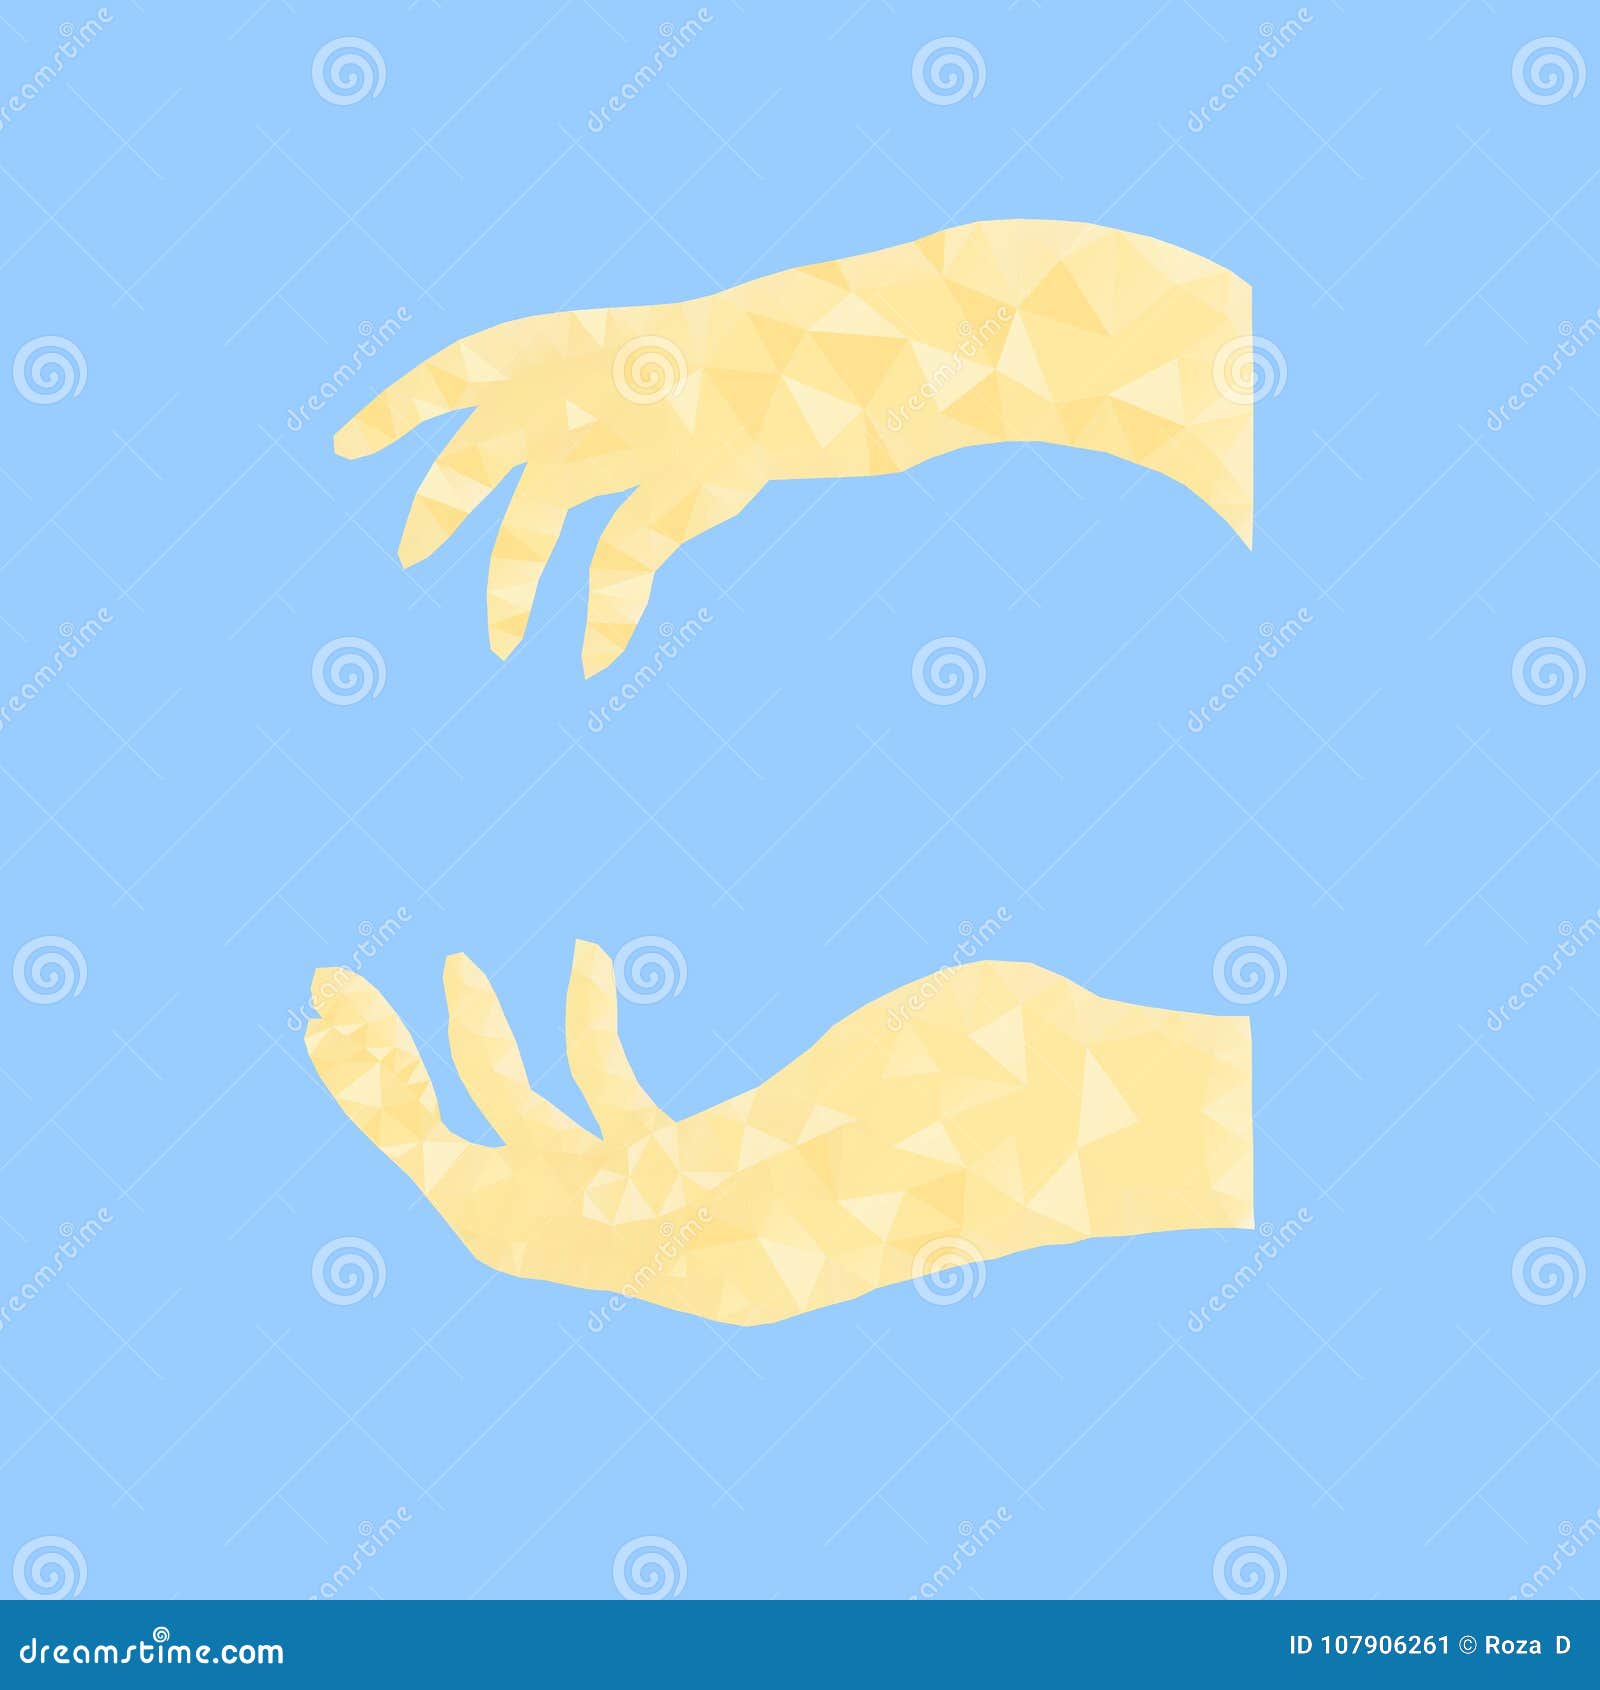 Triangle Home Hand Gesturing Sign, Hand gesture A-OK and Ticking to  coronavirus Concept, Stay Home Save lives Abstract Vector Glyph Icon  Design, Social Distance Symbol on white background, Stock Vector | Adobe